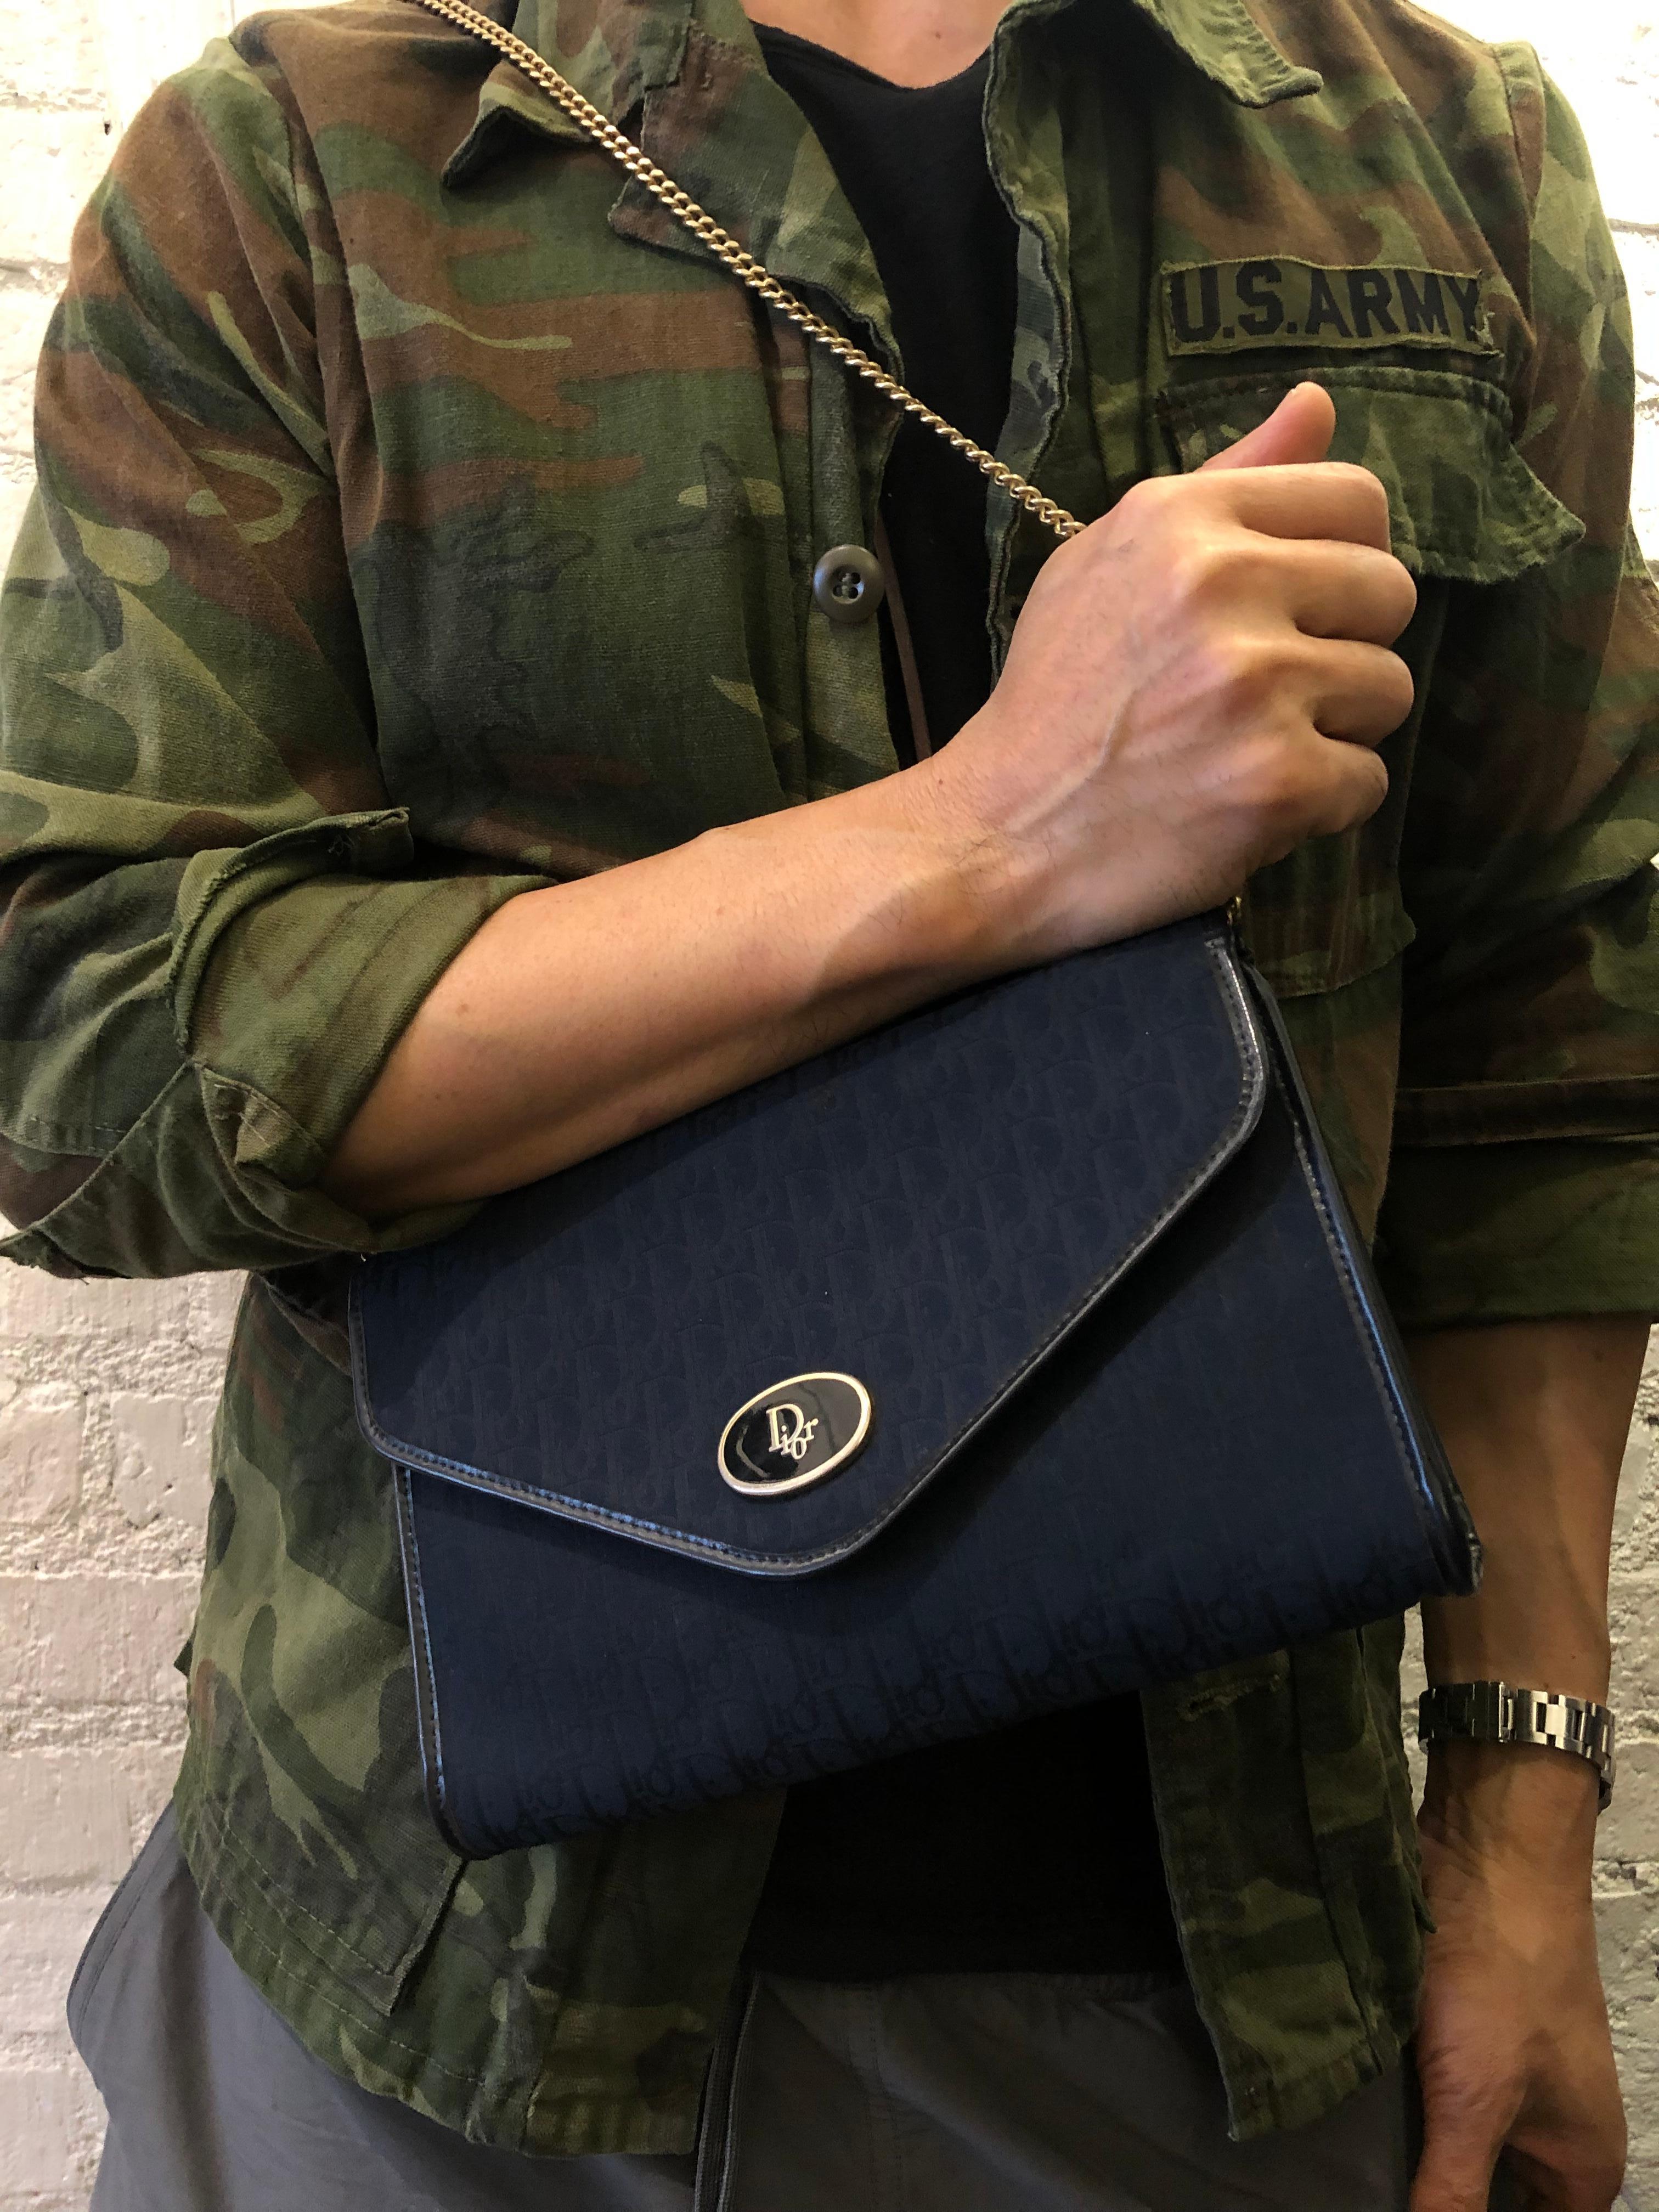 This vintage Christian Dior chain shoulder bag is crafted of Dior’s navy trotter jacquard. Adjustable single or double chained. New magnetic closure opens to a navy coated interior. Made in France. Measures approximately 9.75 x 6.5 x 1.5 inches